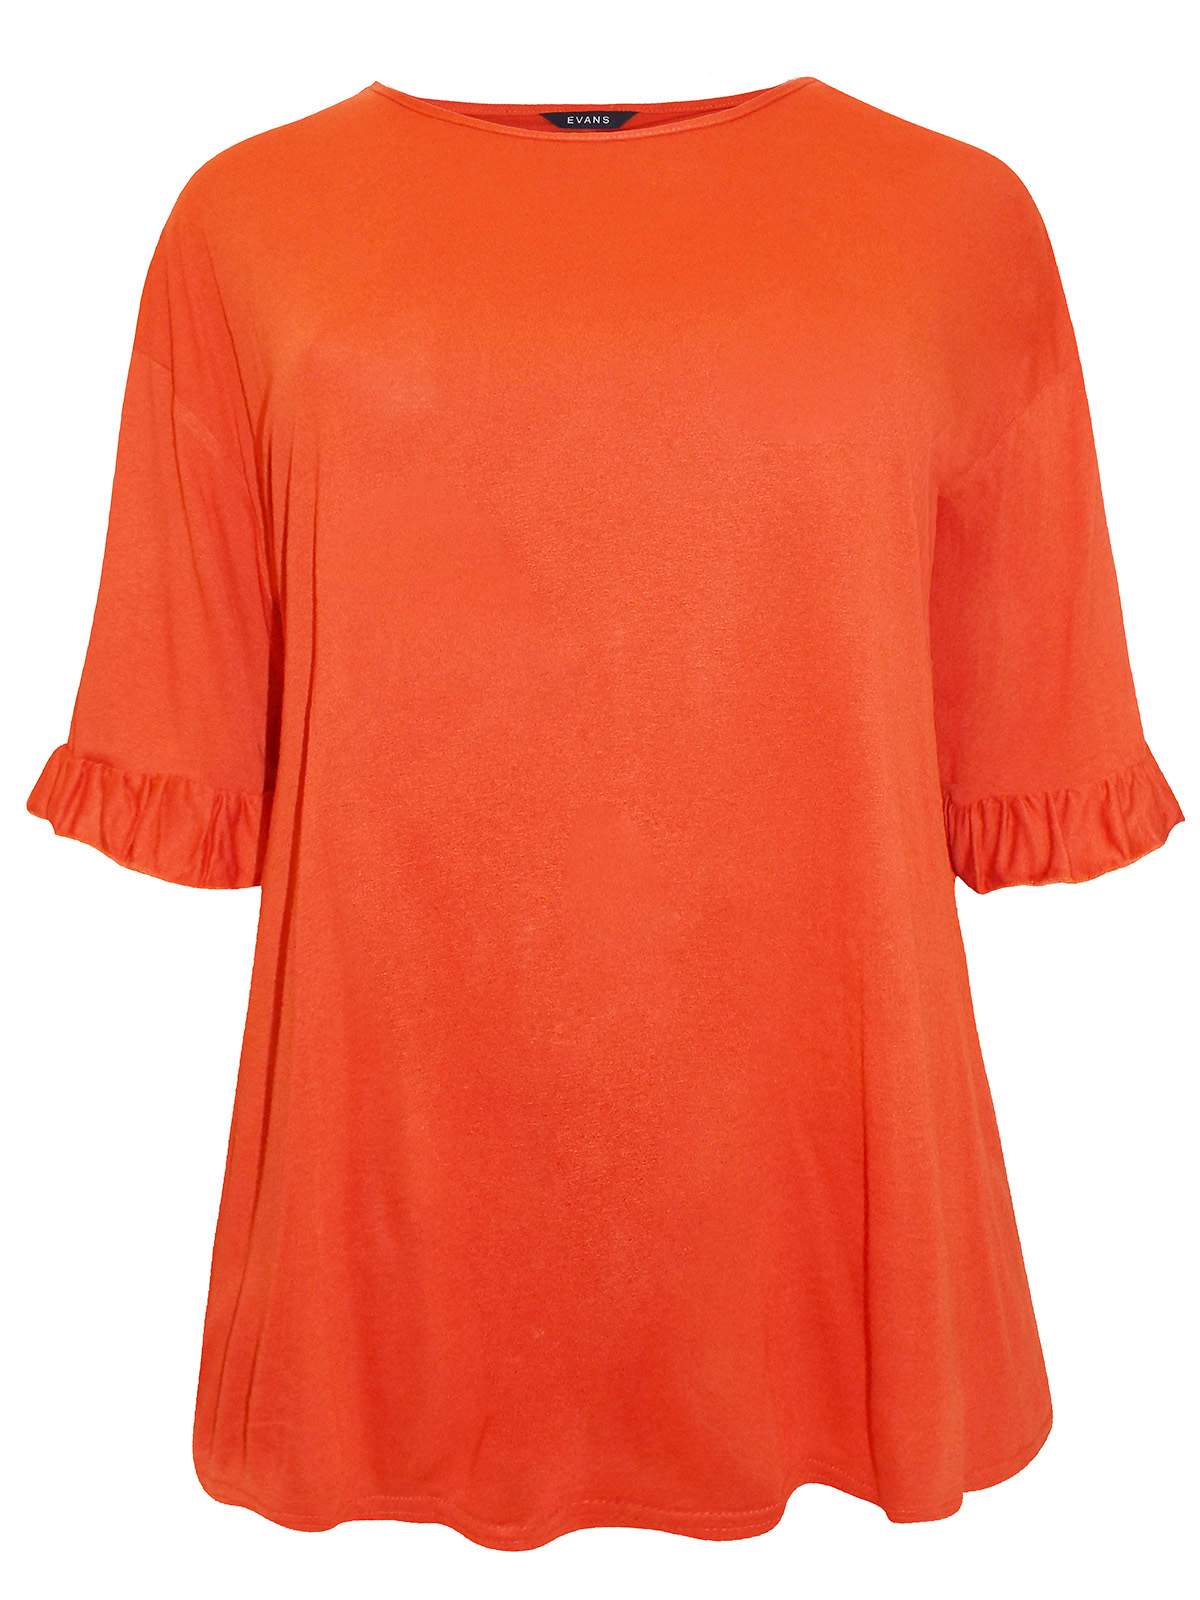 BURNT-ORANGE Frill Sleeve Jersey Top - Plus Size 16 to 30/32